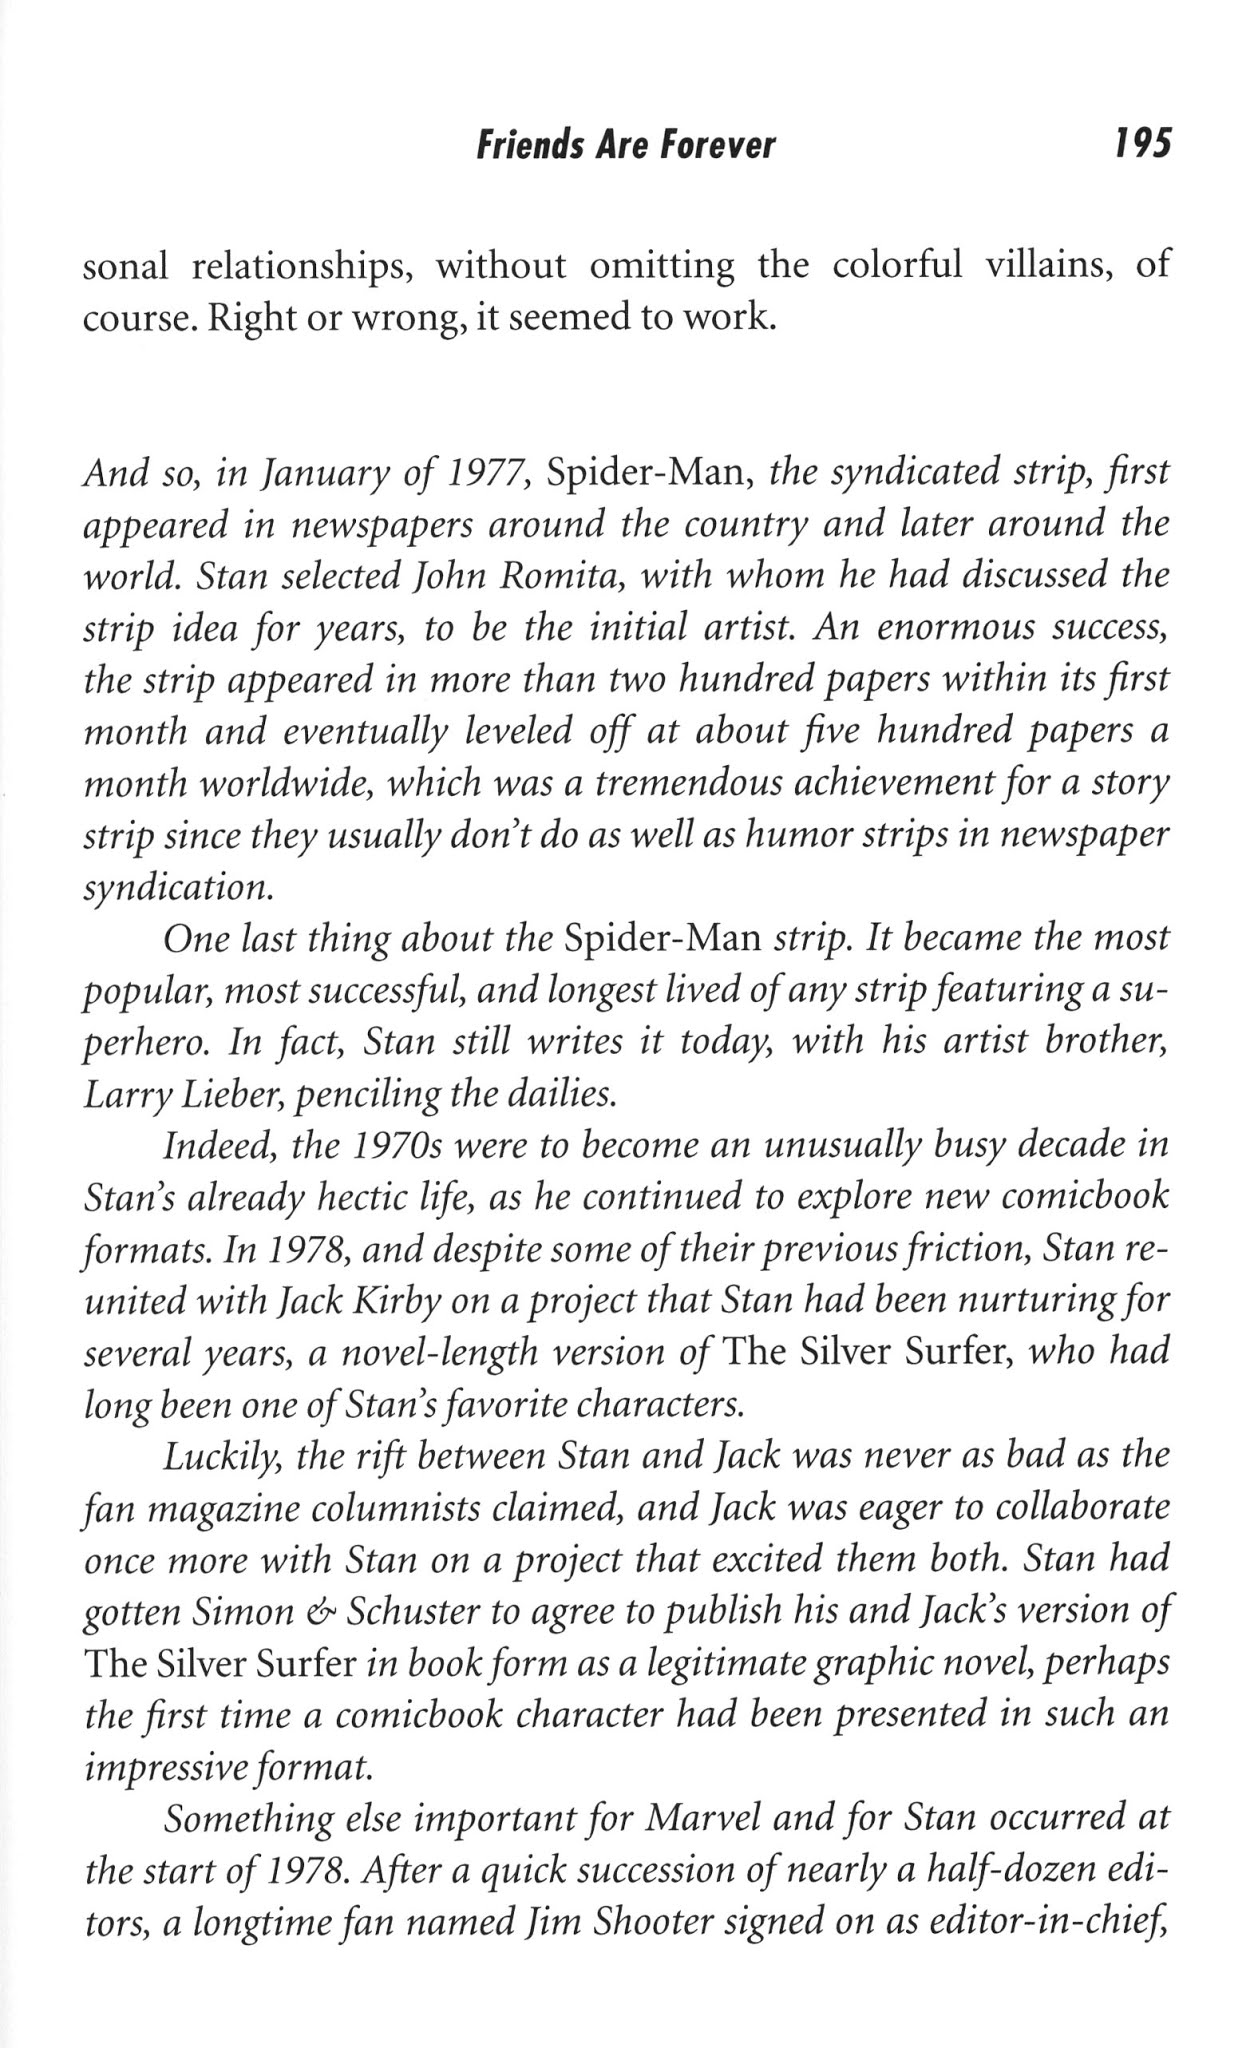 Read online Excelsior! The Amazing Life of Stan Lee comic -  Issue # TPB (Part 3) - 5